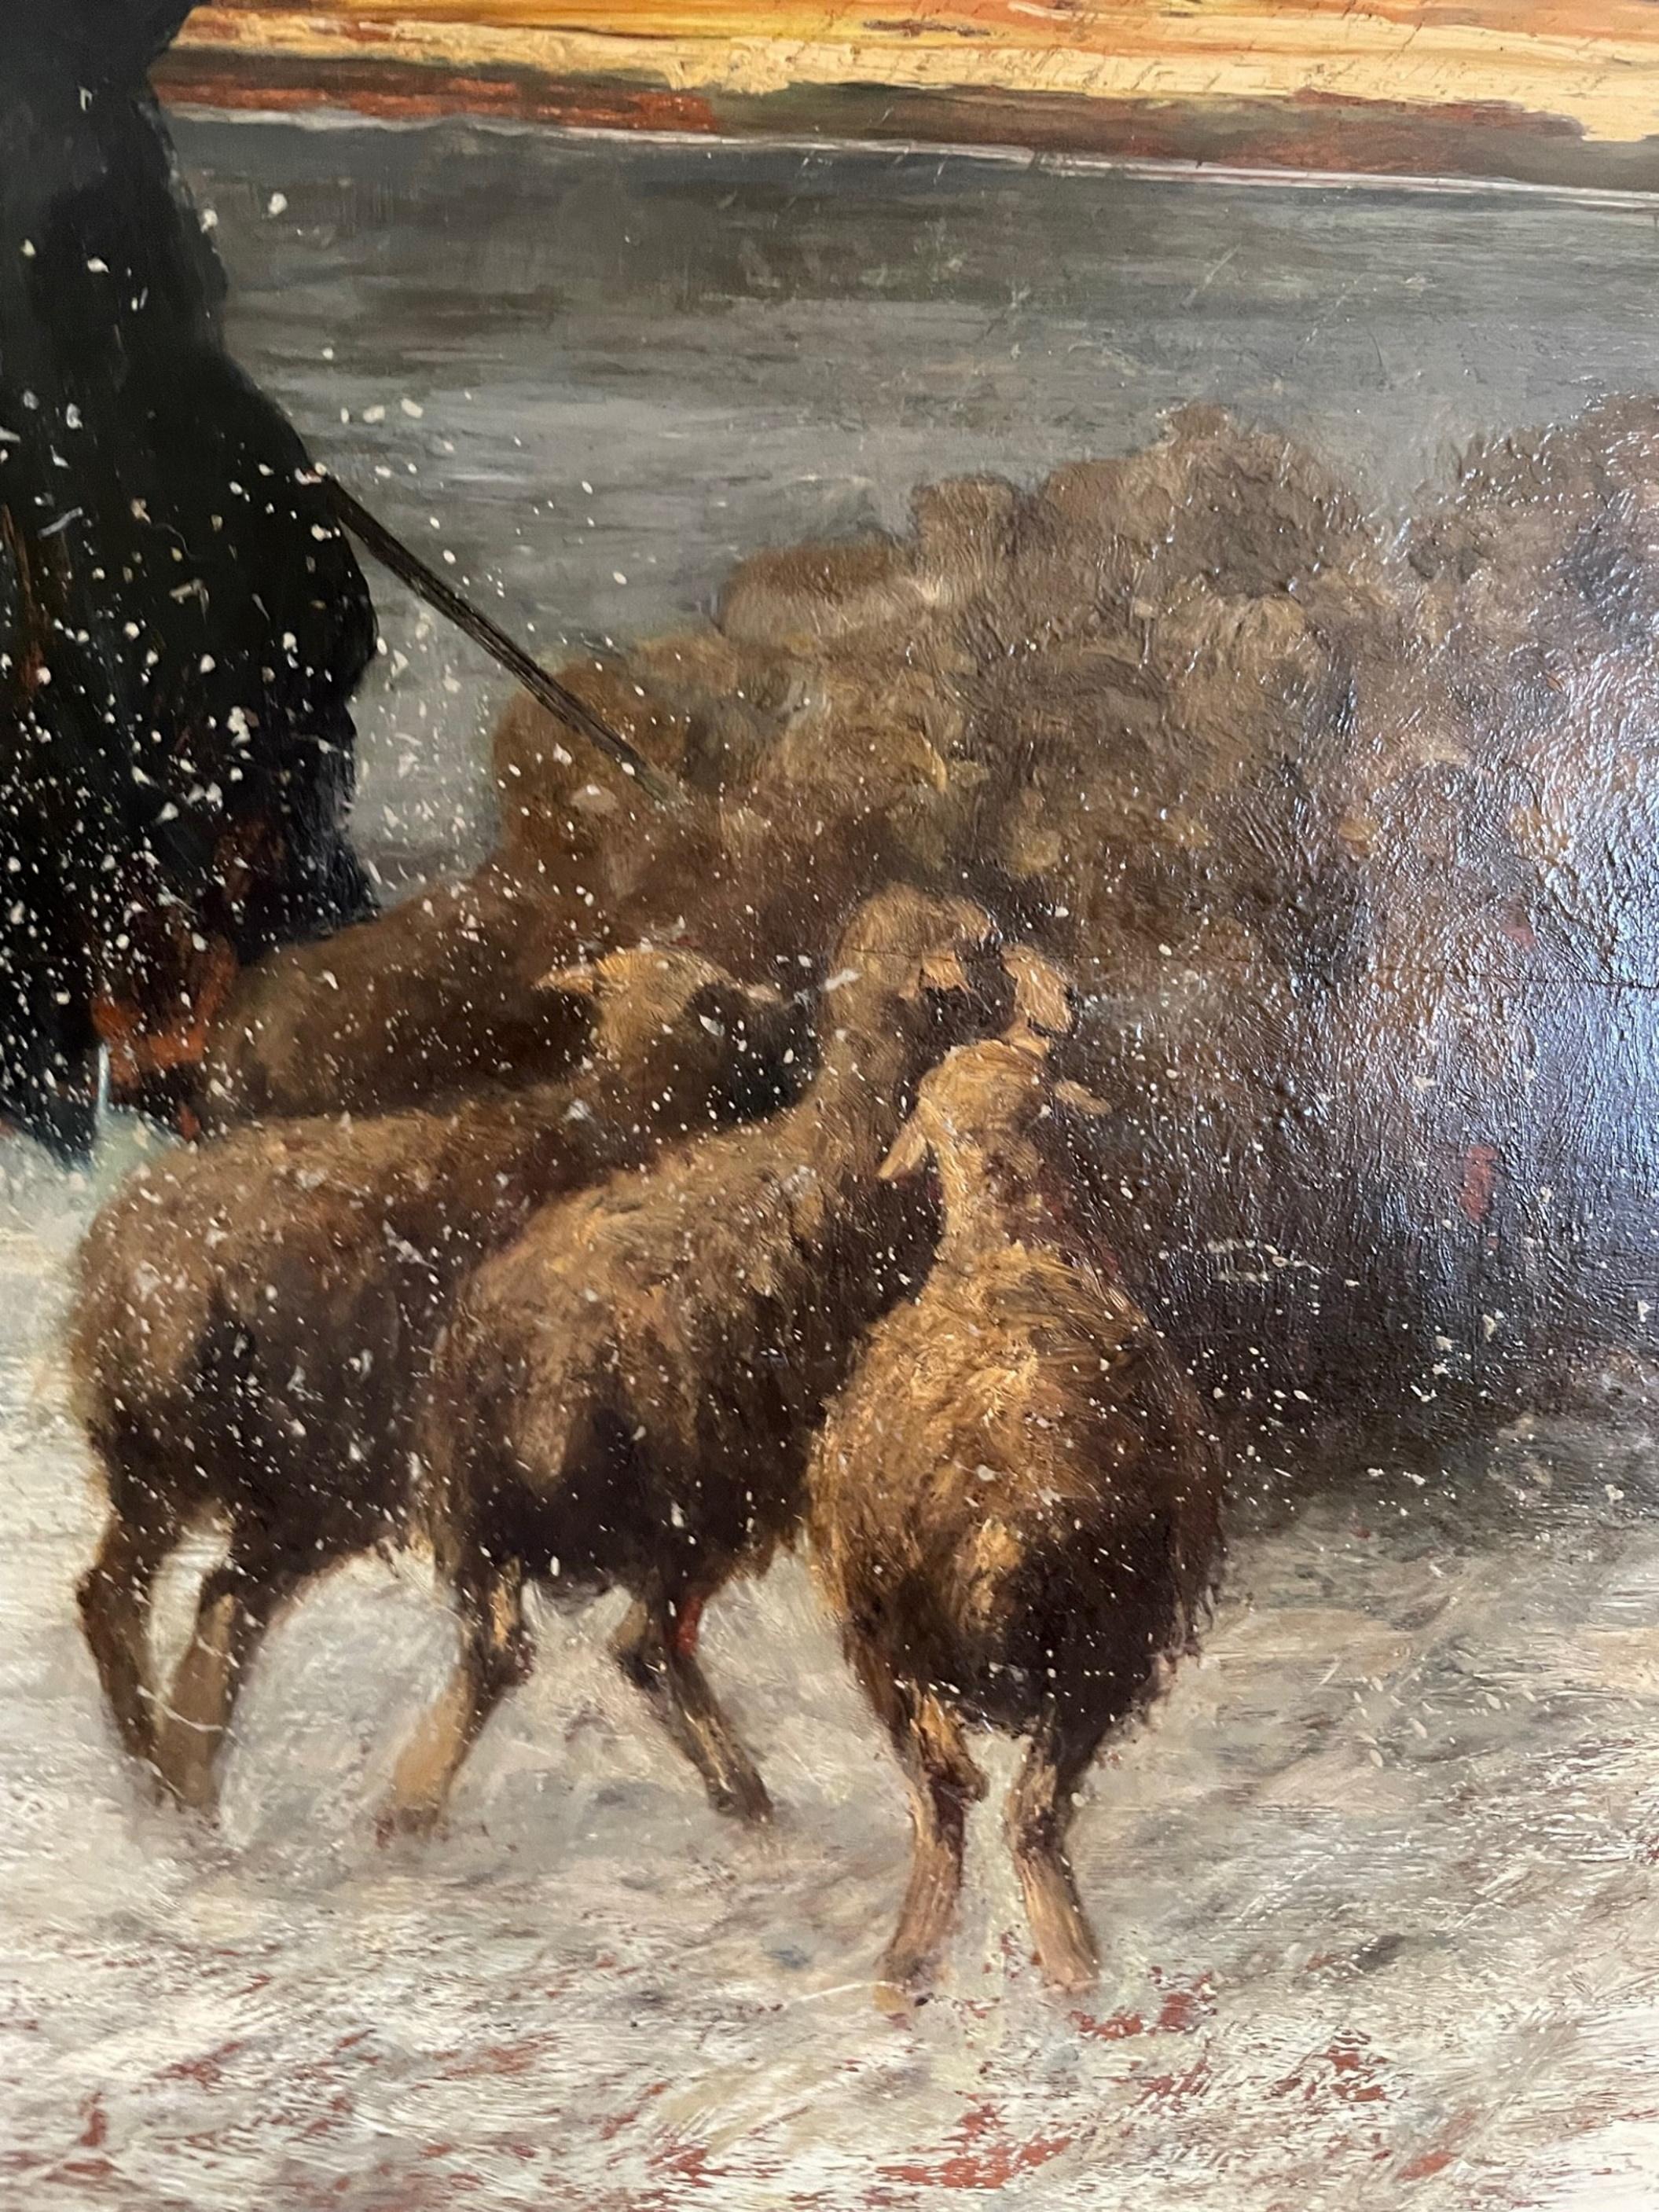 Wood French 19th C. Barbizon Painting “Sheep in Blizzard” Signed Gustave Courbet For Sale